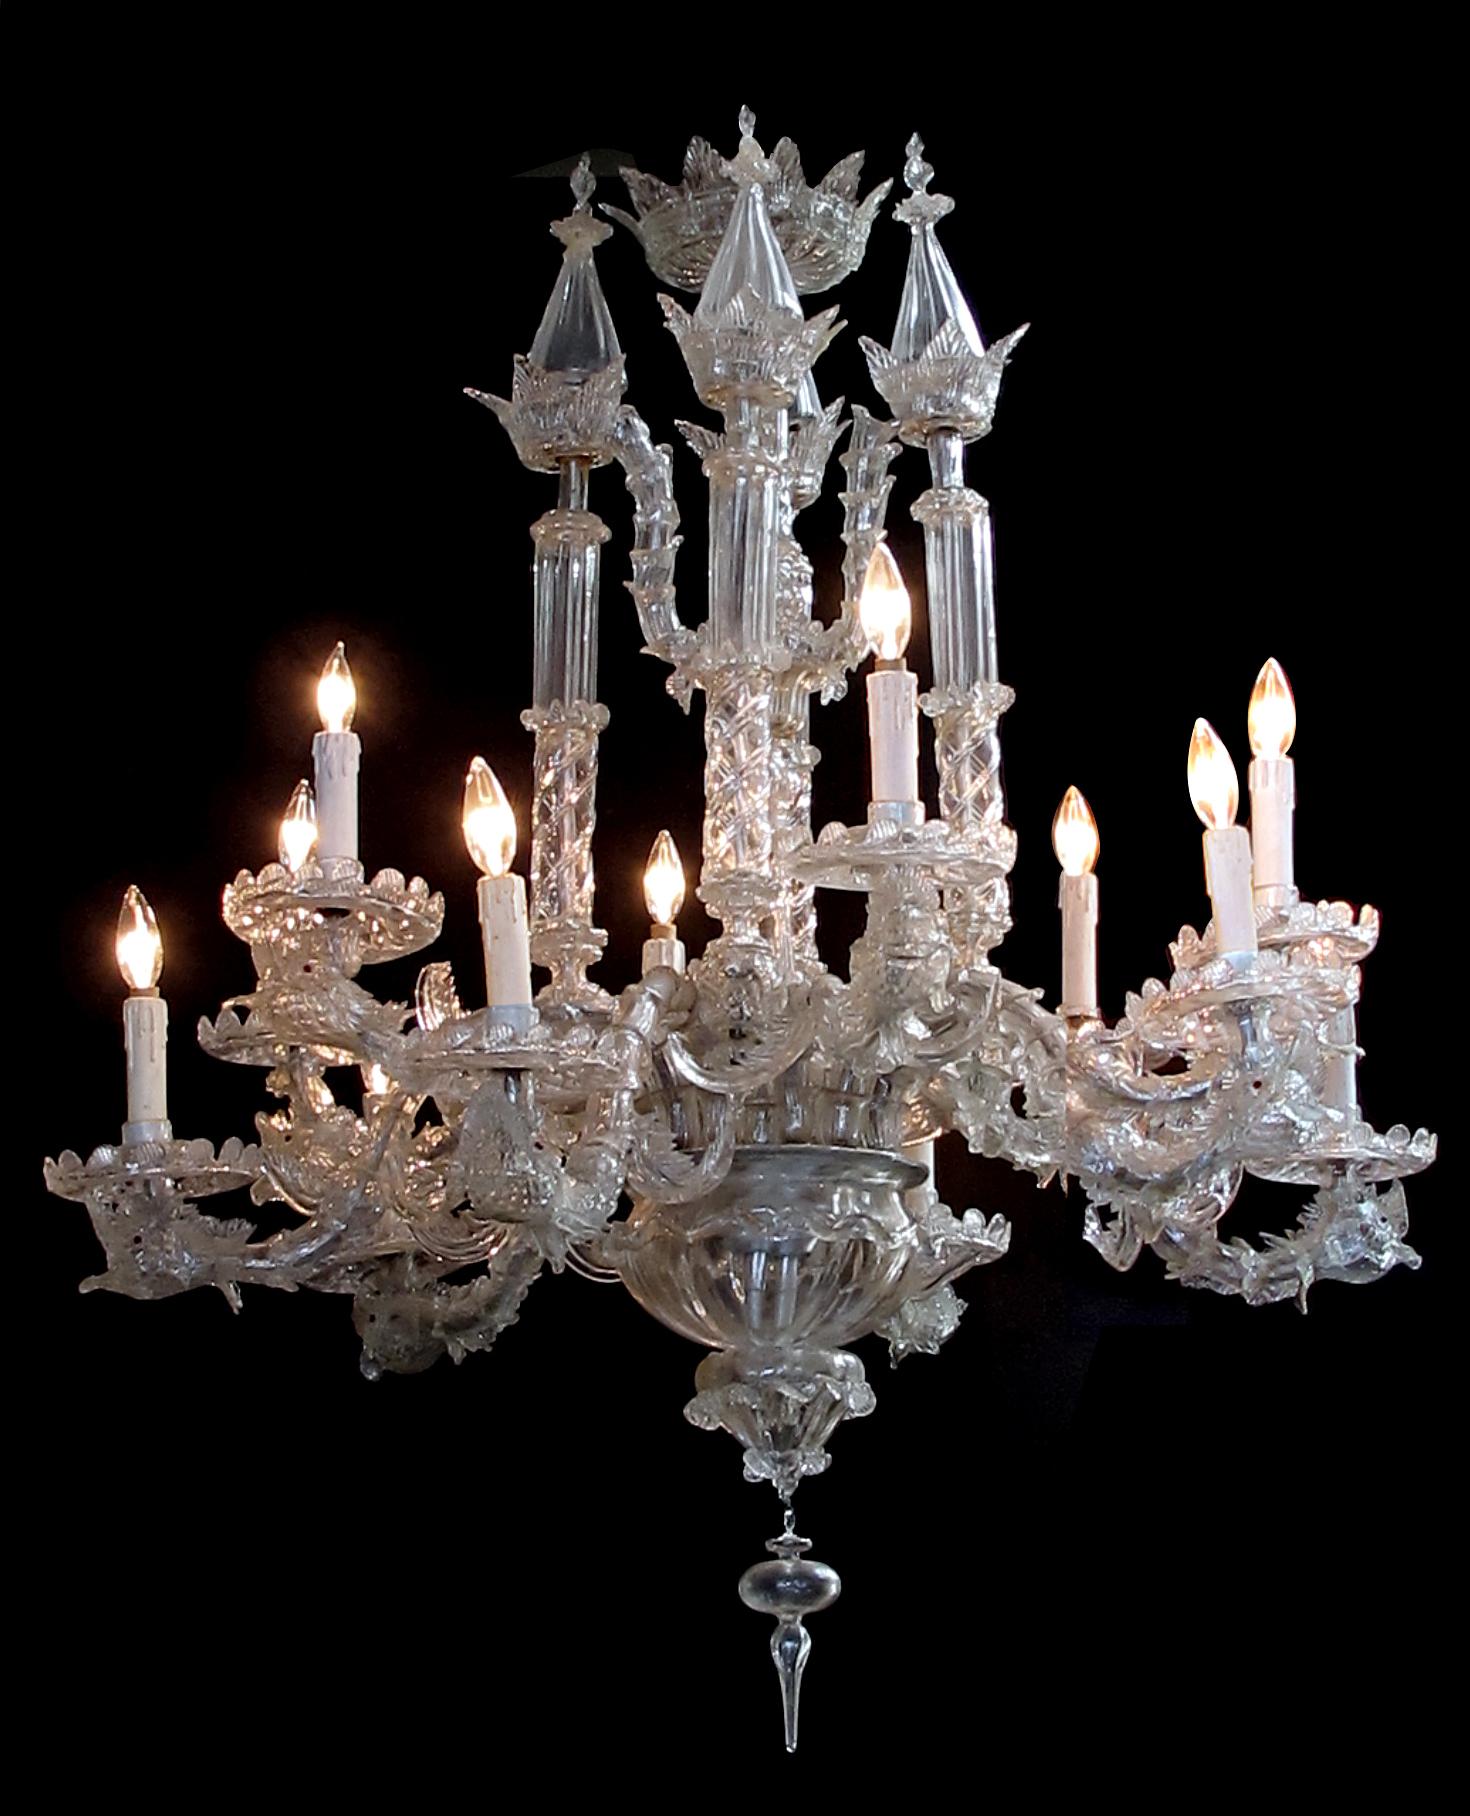 An outstanding example of Venetian glasswork, the center support surrounded by 4 tall glass spires above a large bowl and pendant; all emanating 12 curvaceous arms sheathed in imbricated glass rings ending in expressive dolphin heads supporting